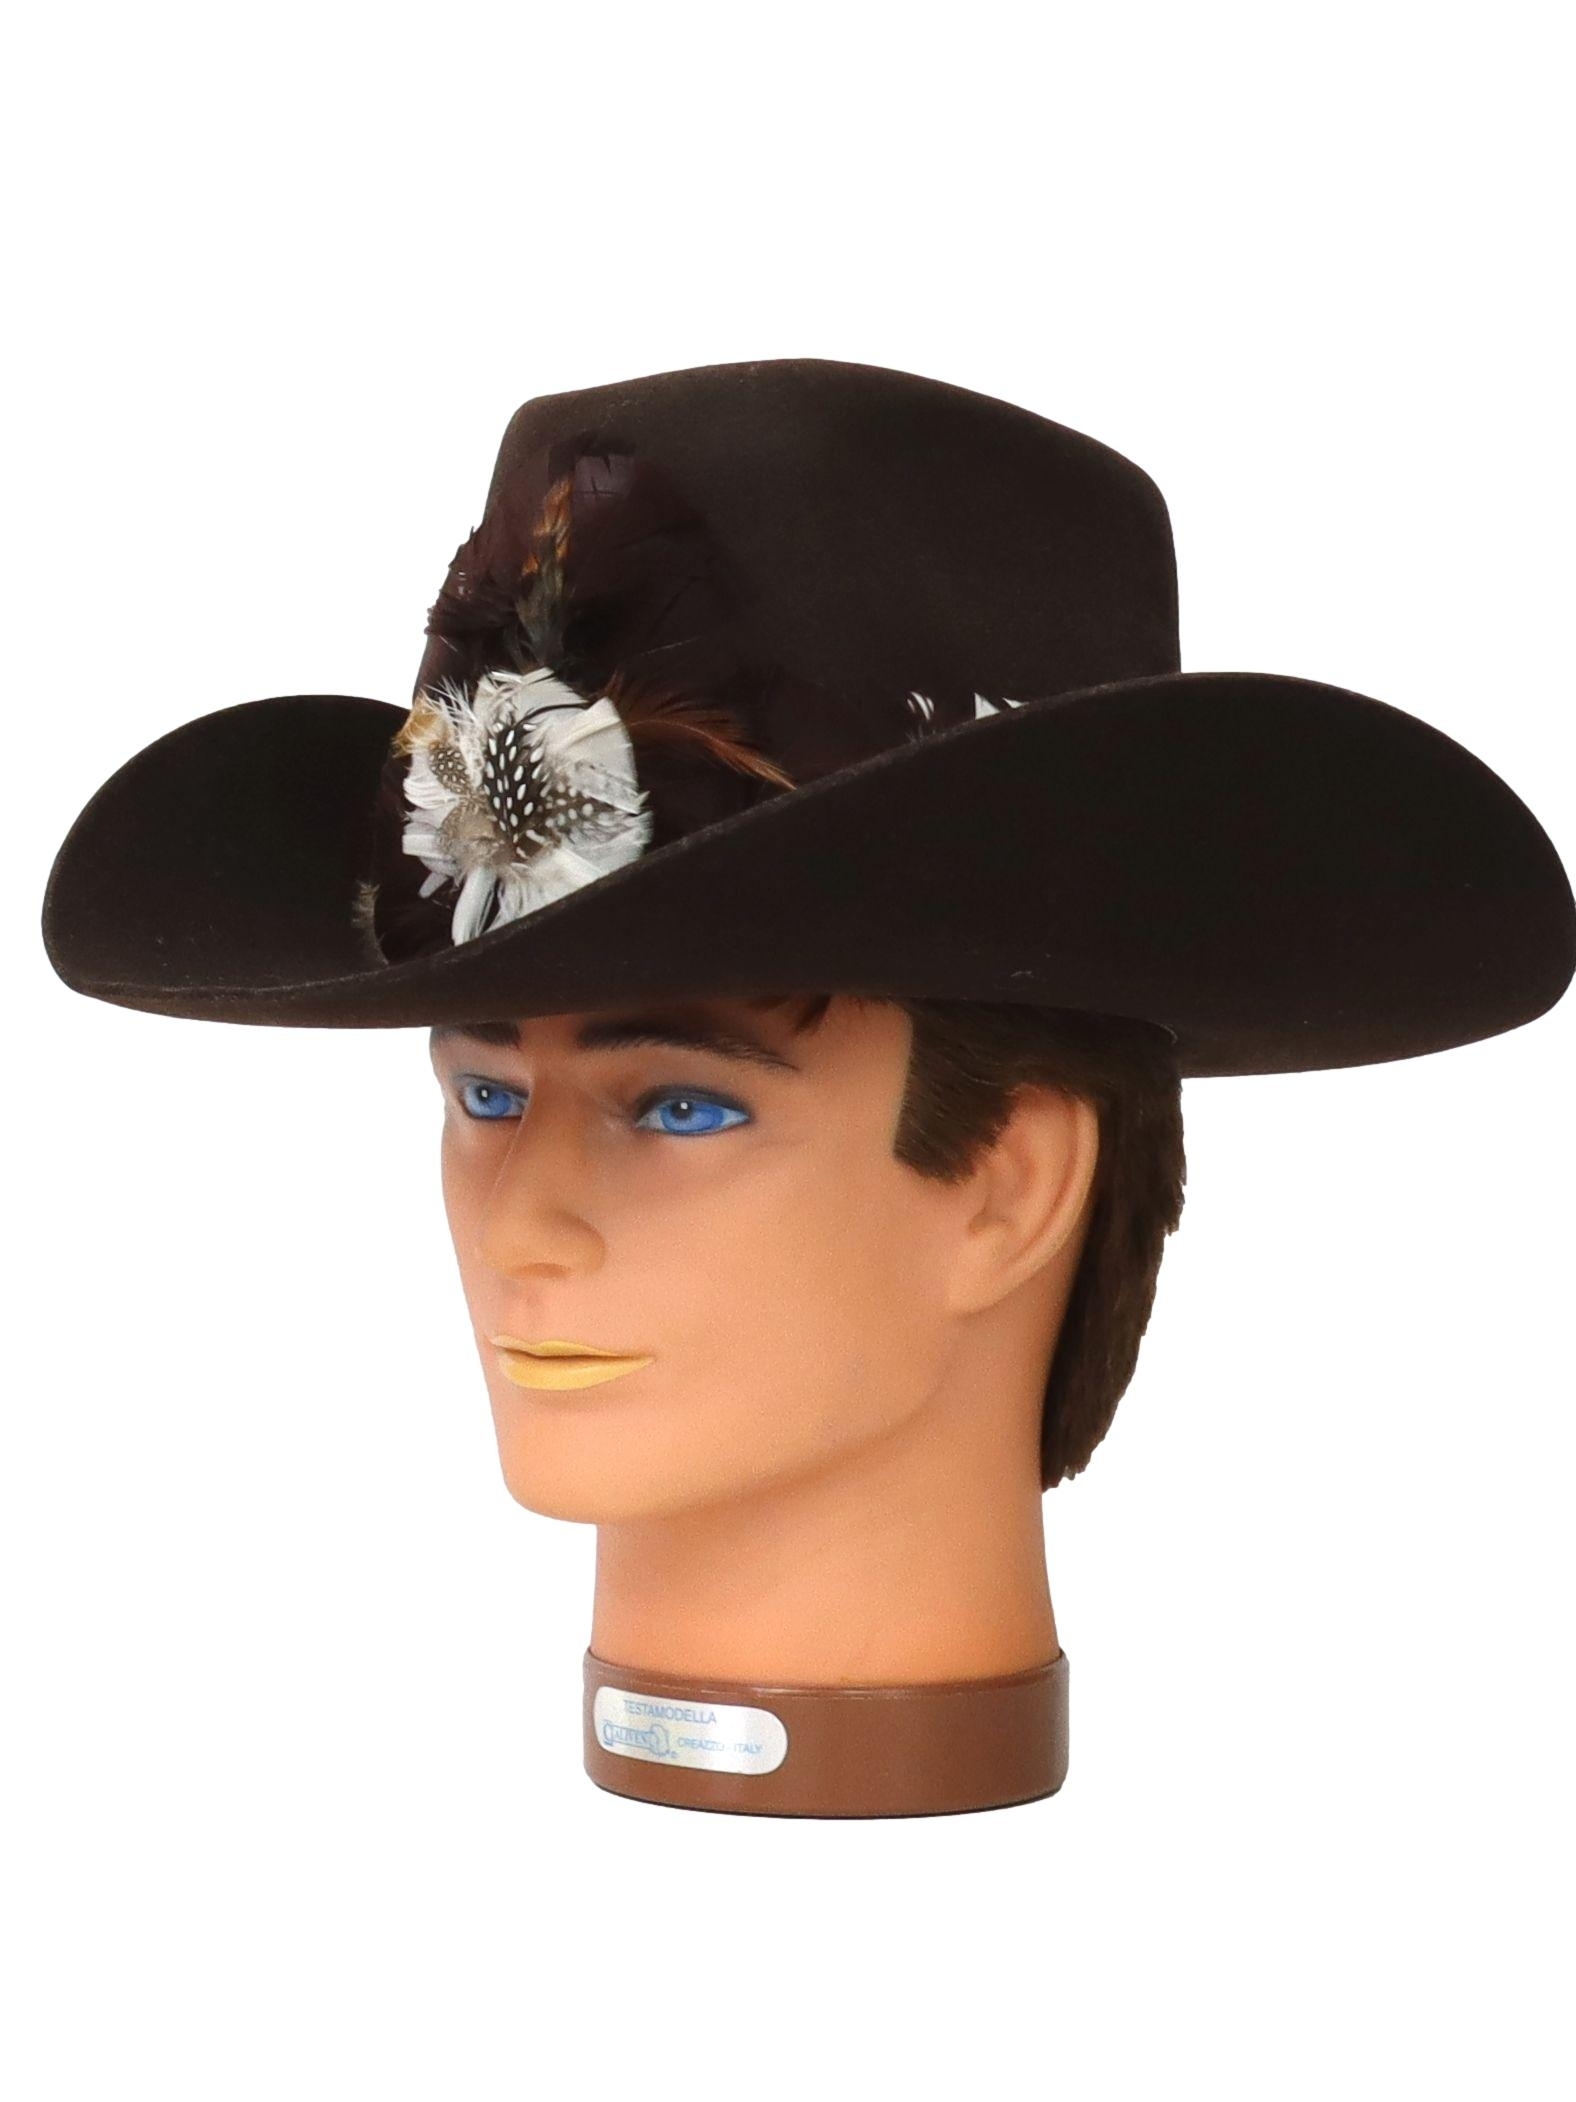 Vintage Hat from The 1970's (Western Trails)